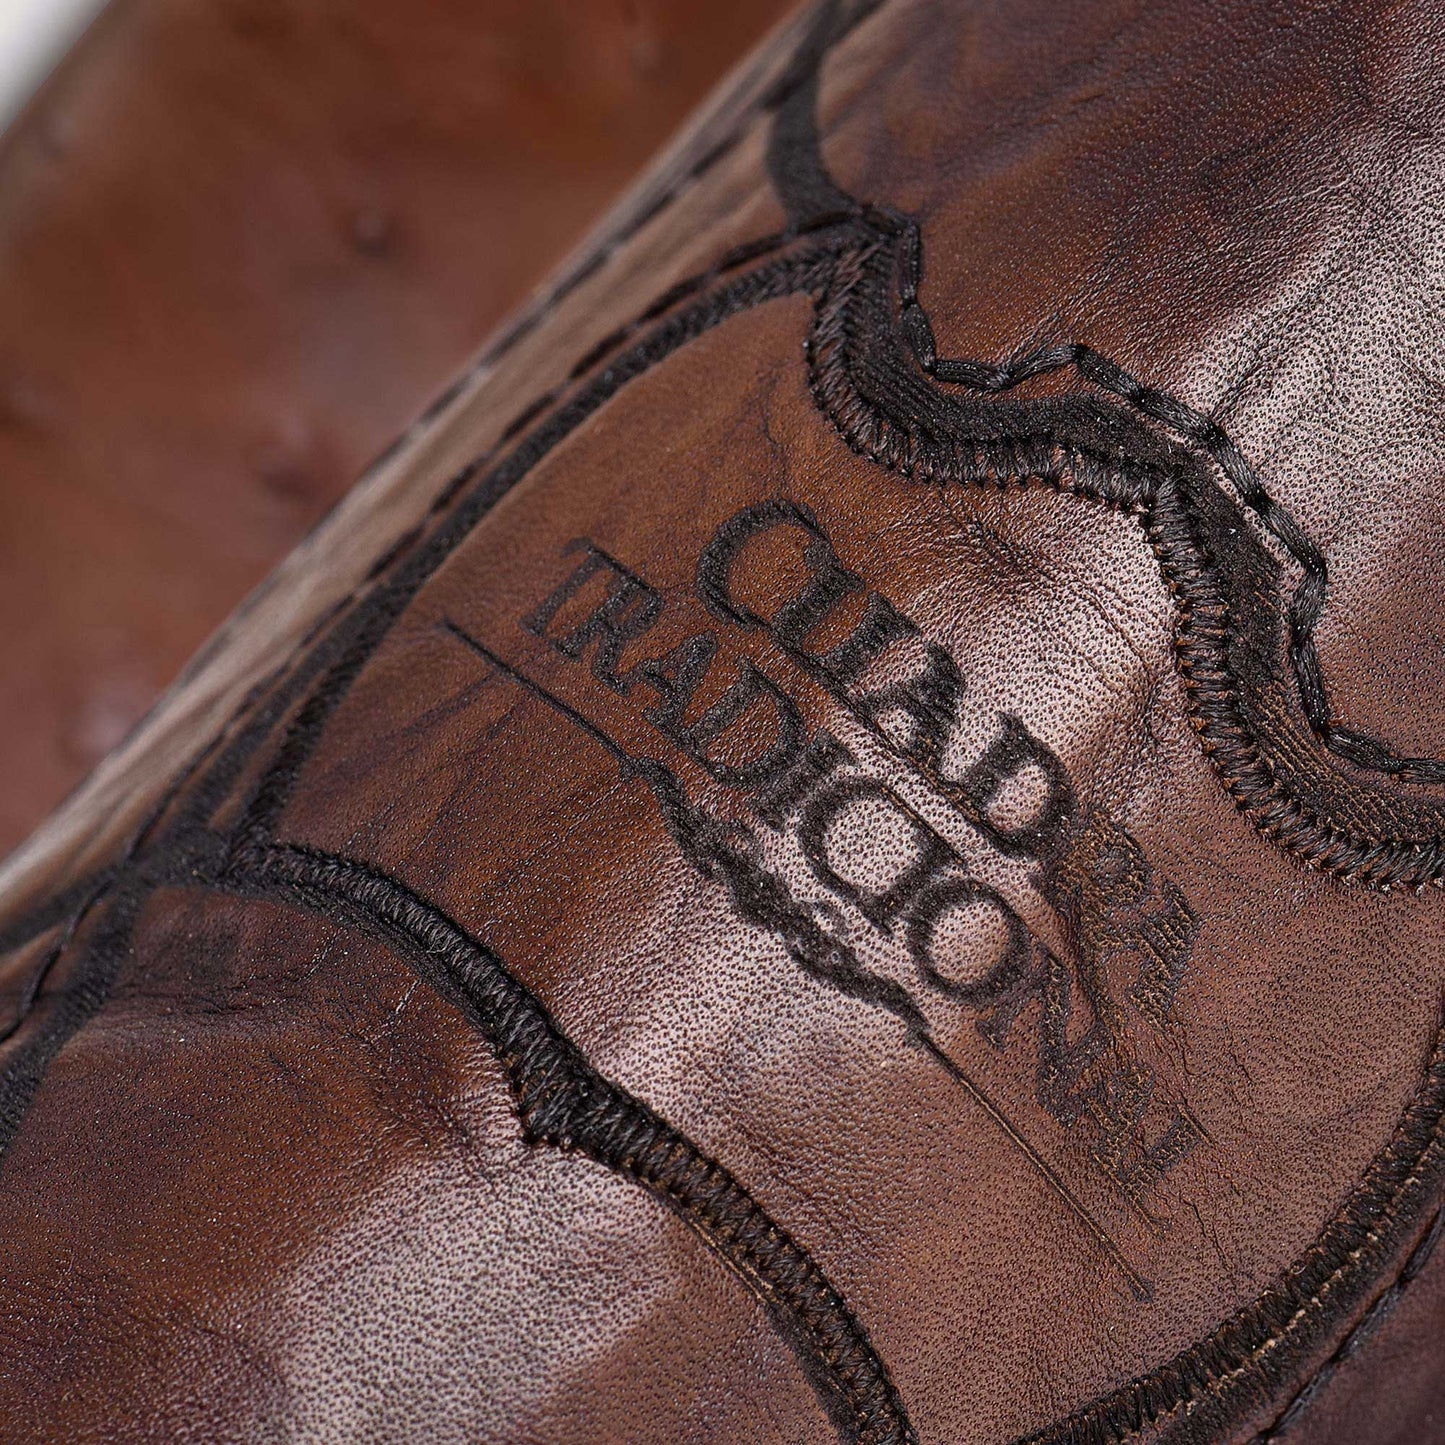 Stylish brown leather boot with intricate engraving and a timeless design.